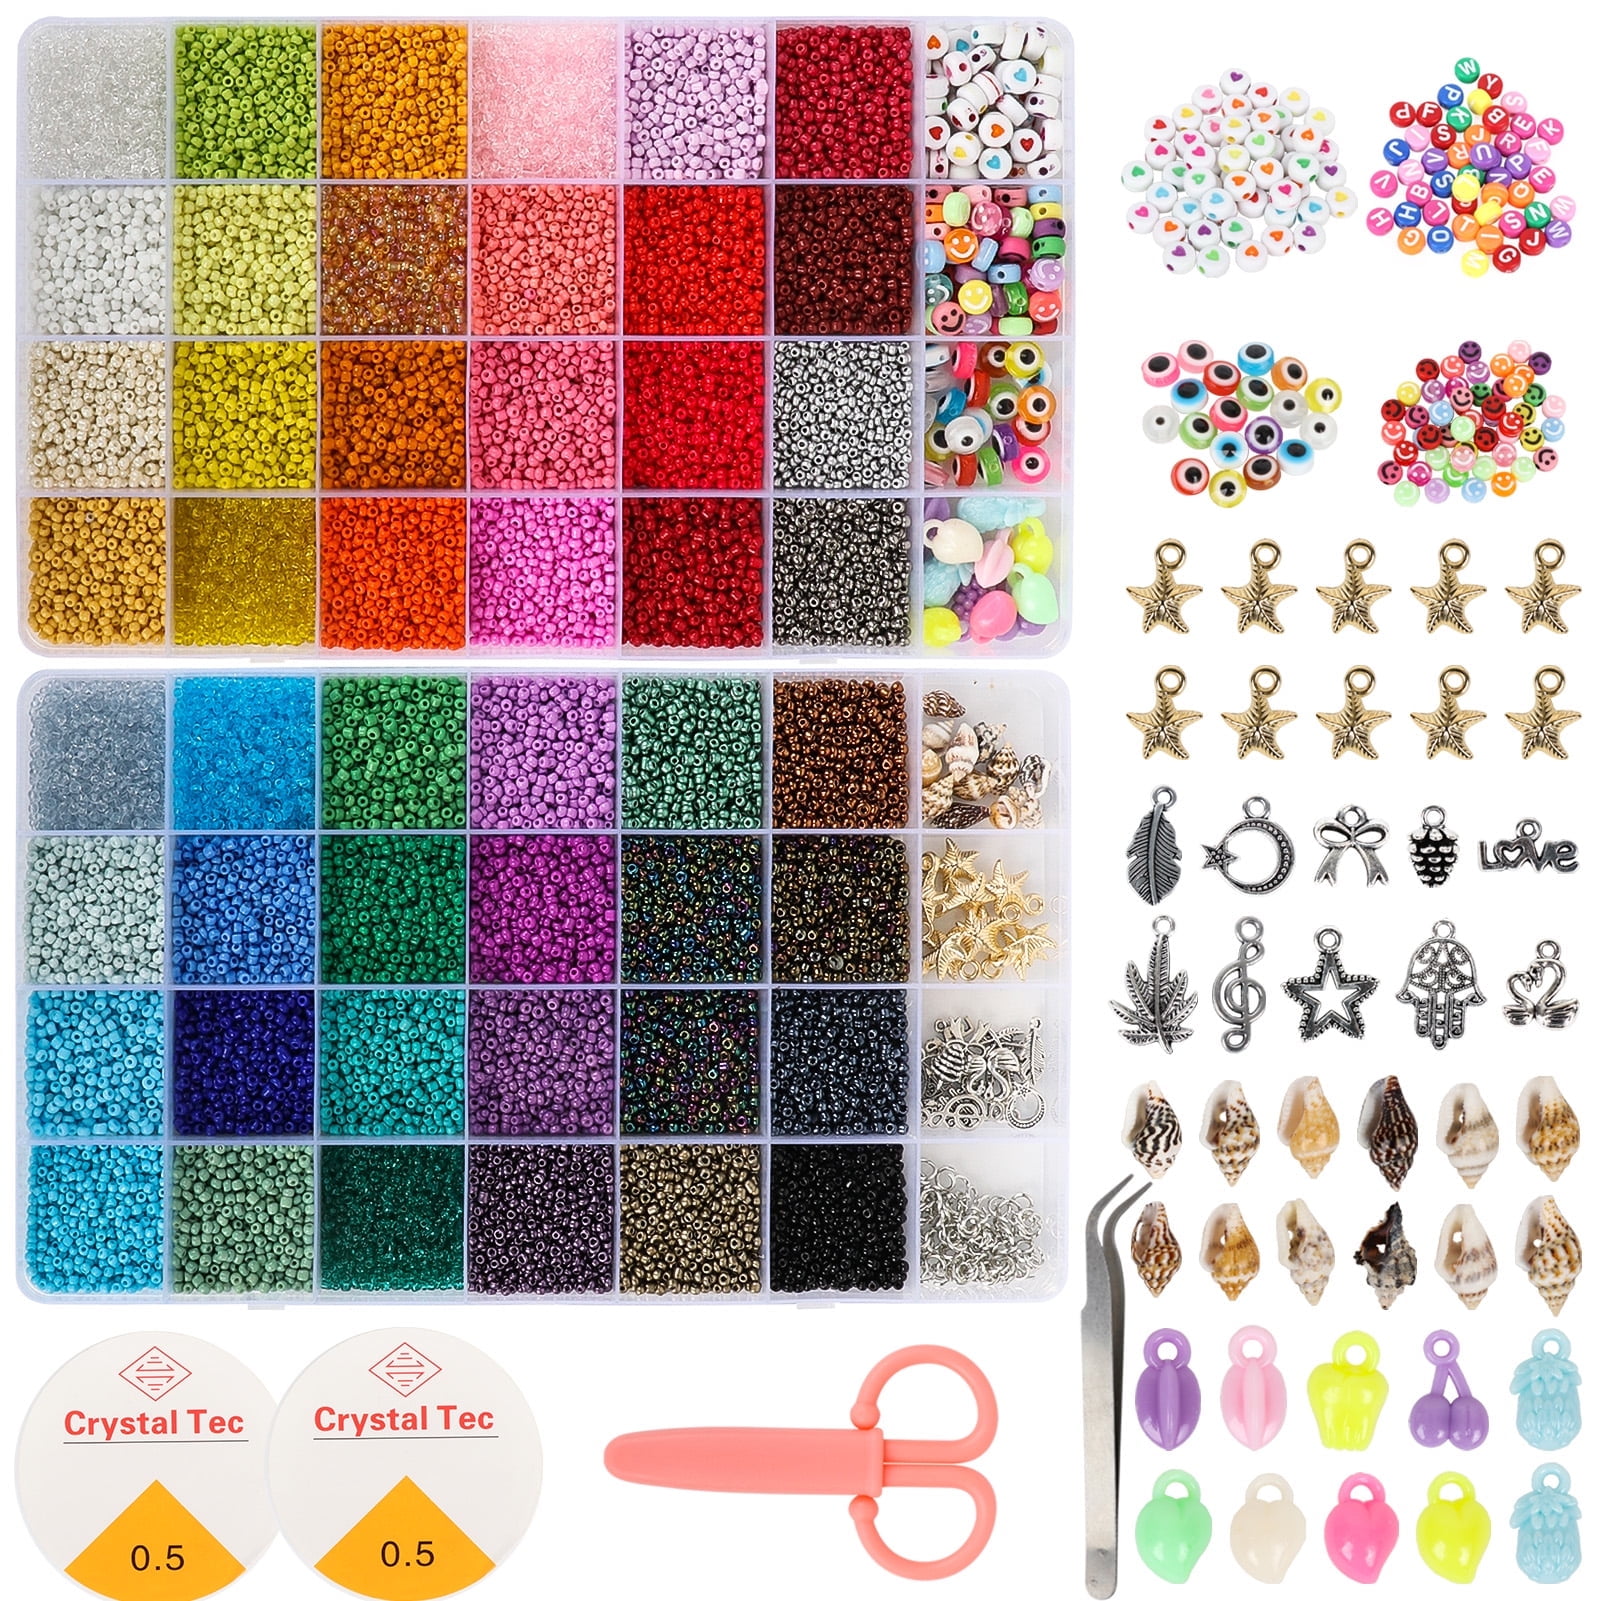 Naler Craft Kits,2mm Red Glass Seed Beads & Assorted Alphabet Letter Beads  for Women Girls DIY Bracelets,Jewelry Making & Beading 